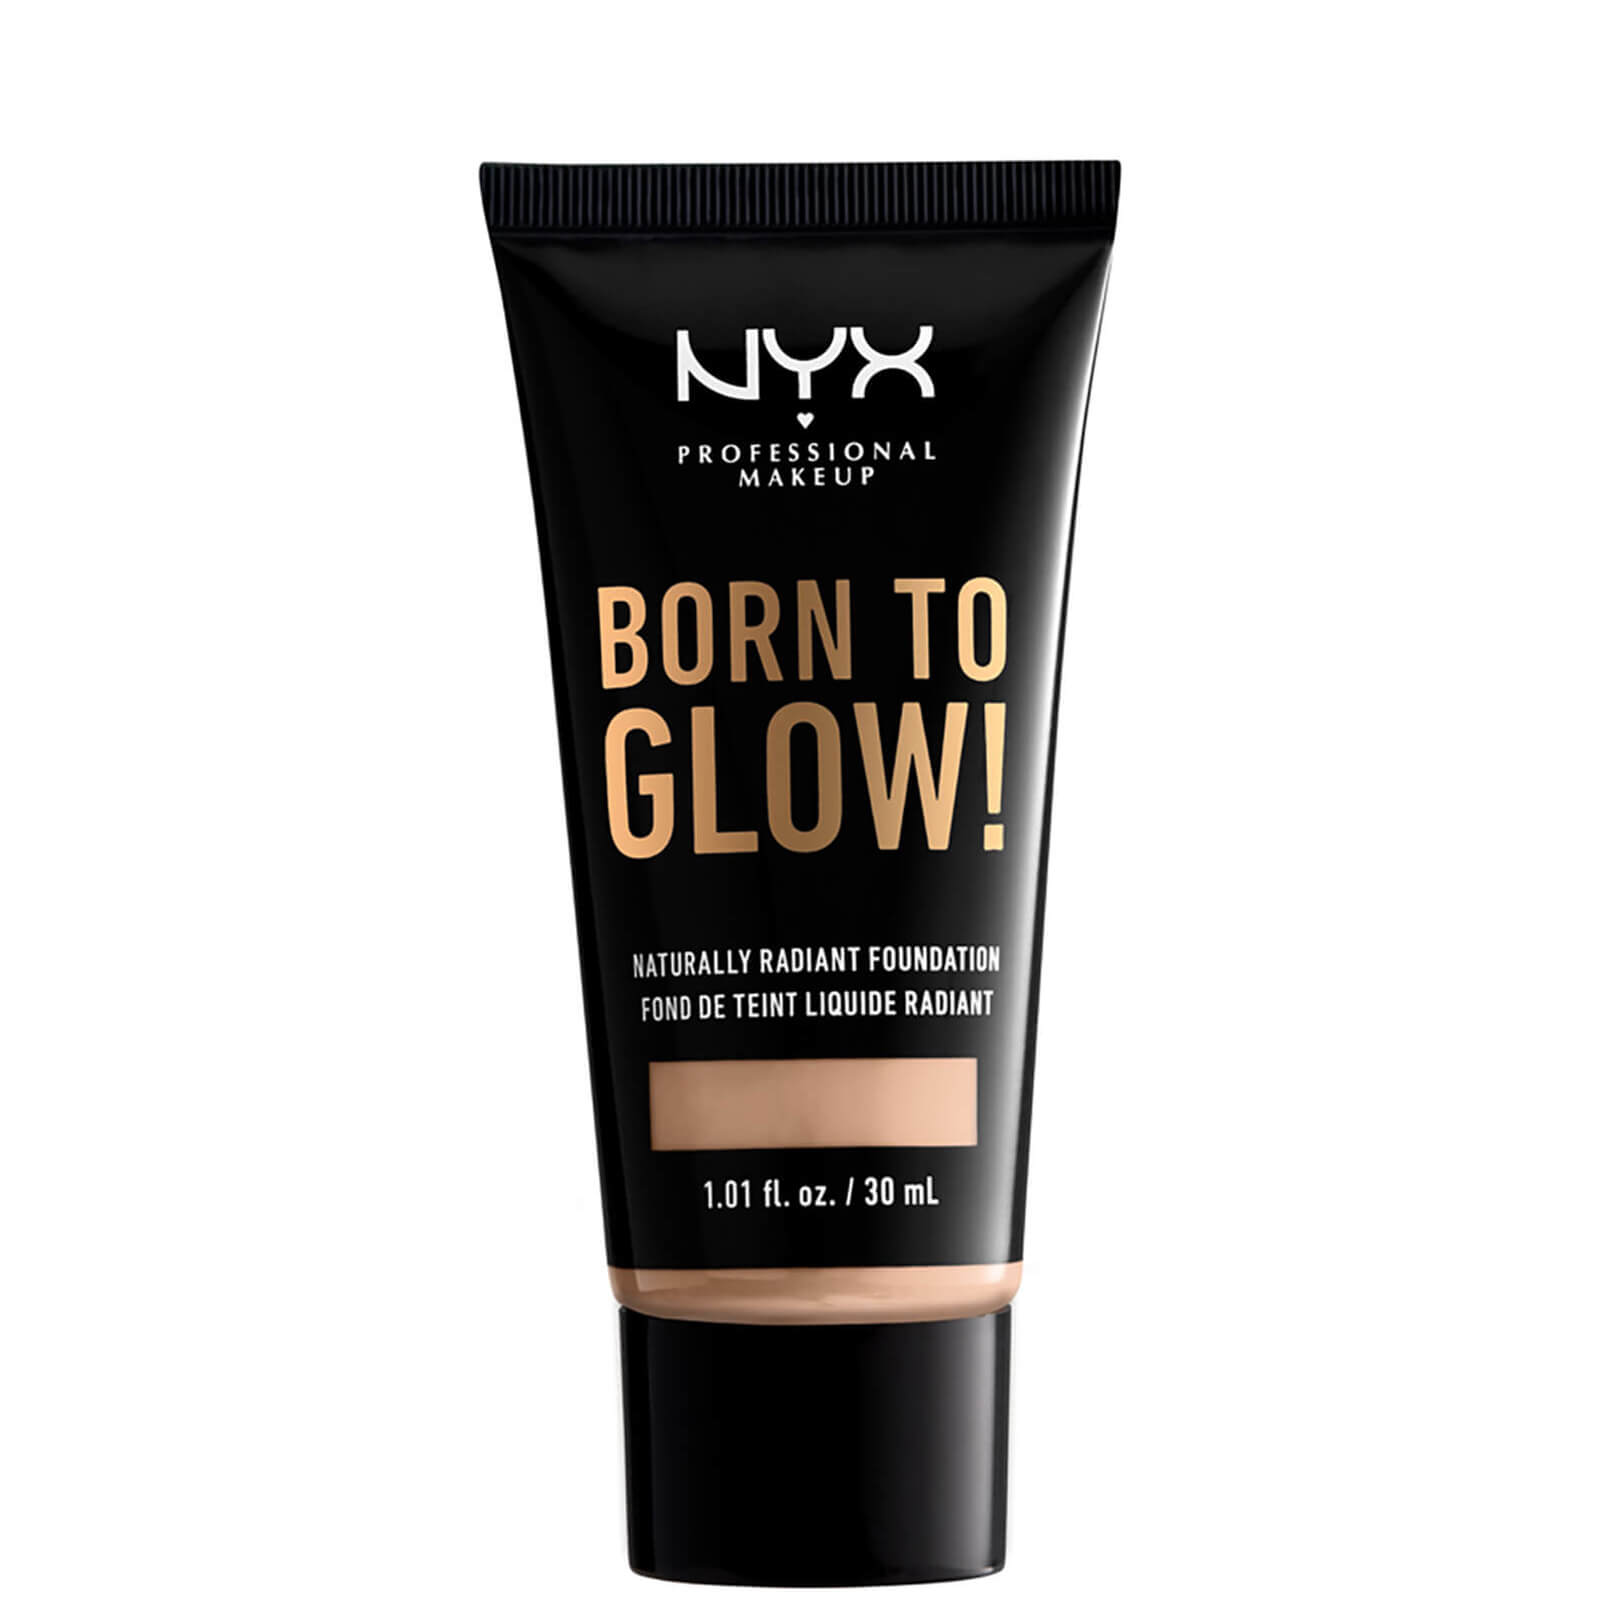 Image of NYX Professional Makeup Born to Glow Naturally Radiant Foundation 30ml (Various Shades) - Light